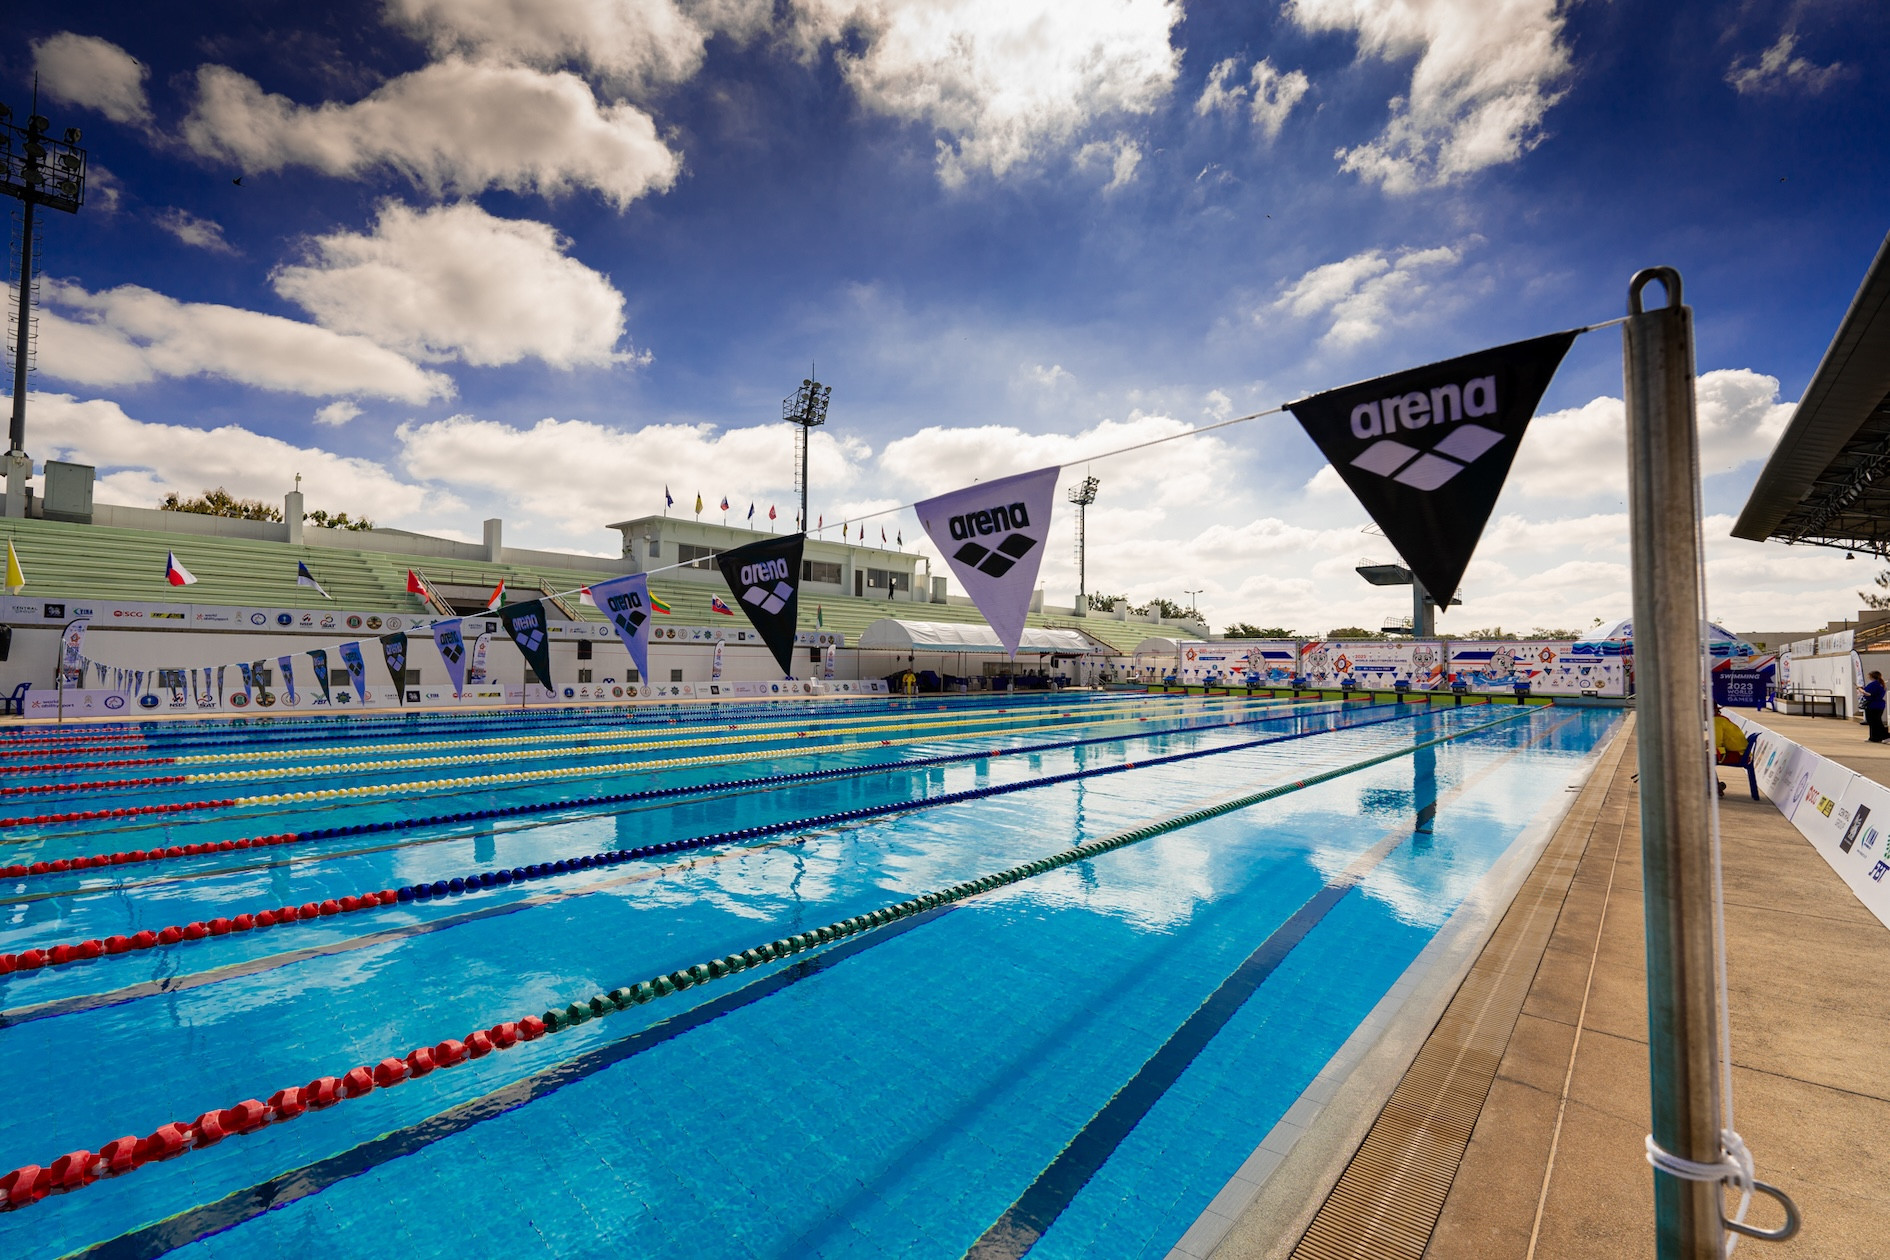 The aquatic centre is the venue for swimming and water sports. GETTY IMAGES